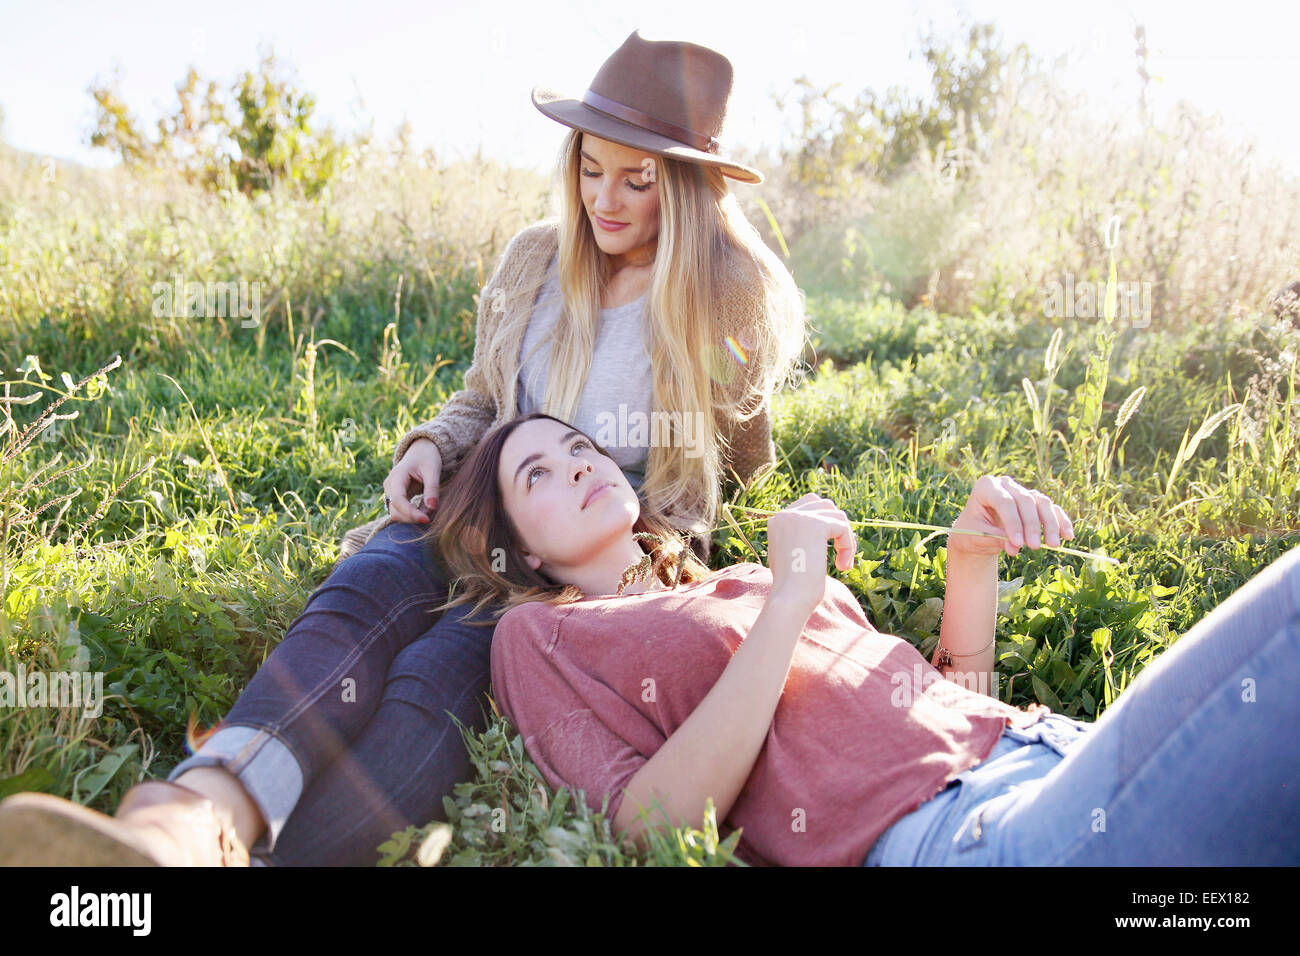 Apple orchard. Two women lying in the grass. Stock Photo